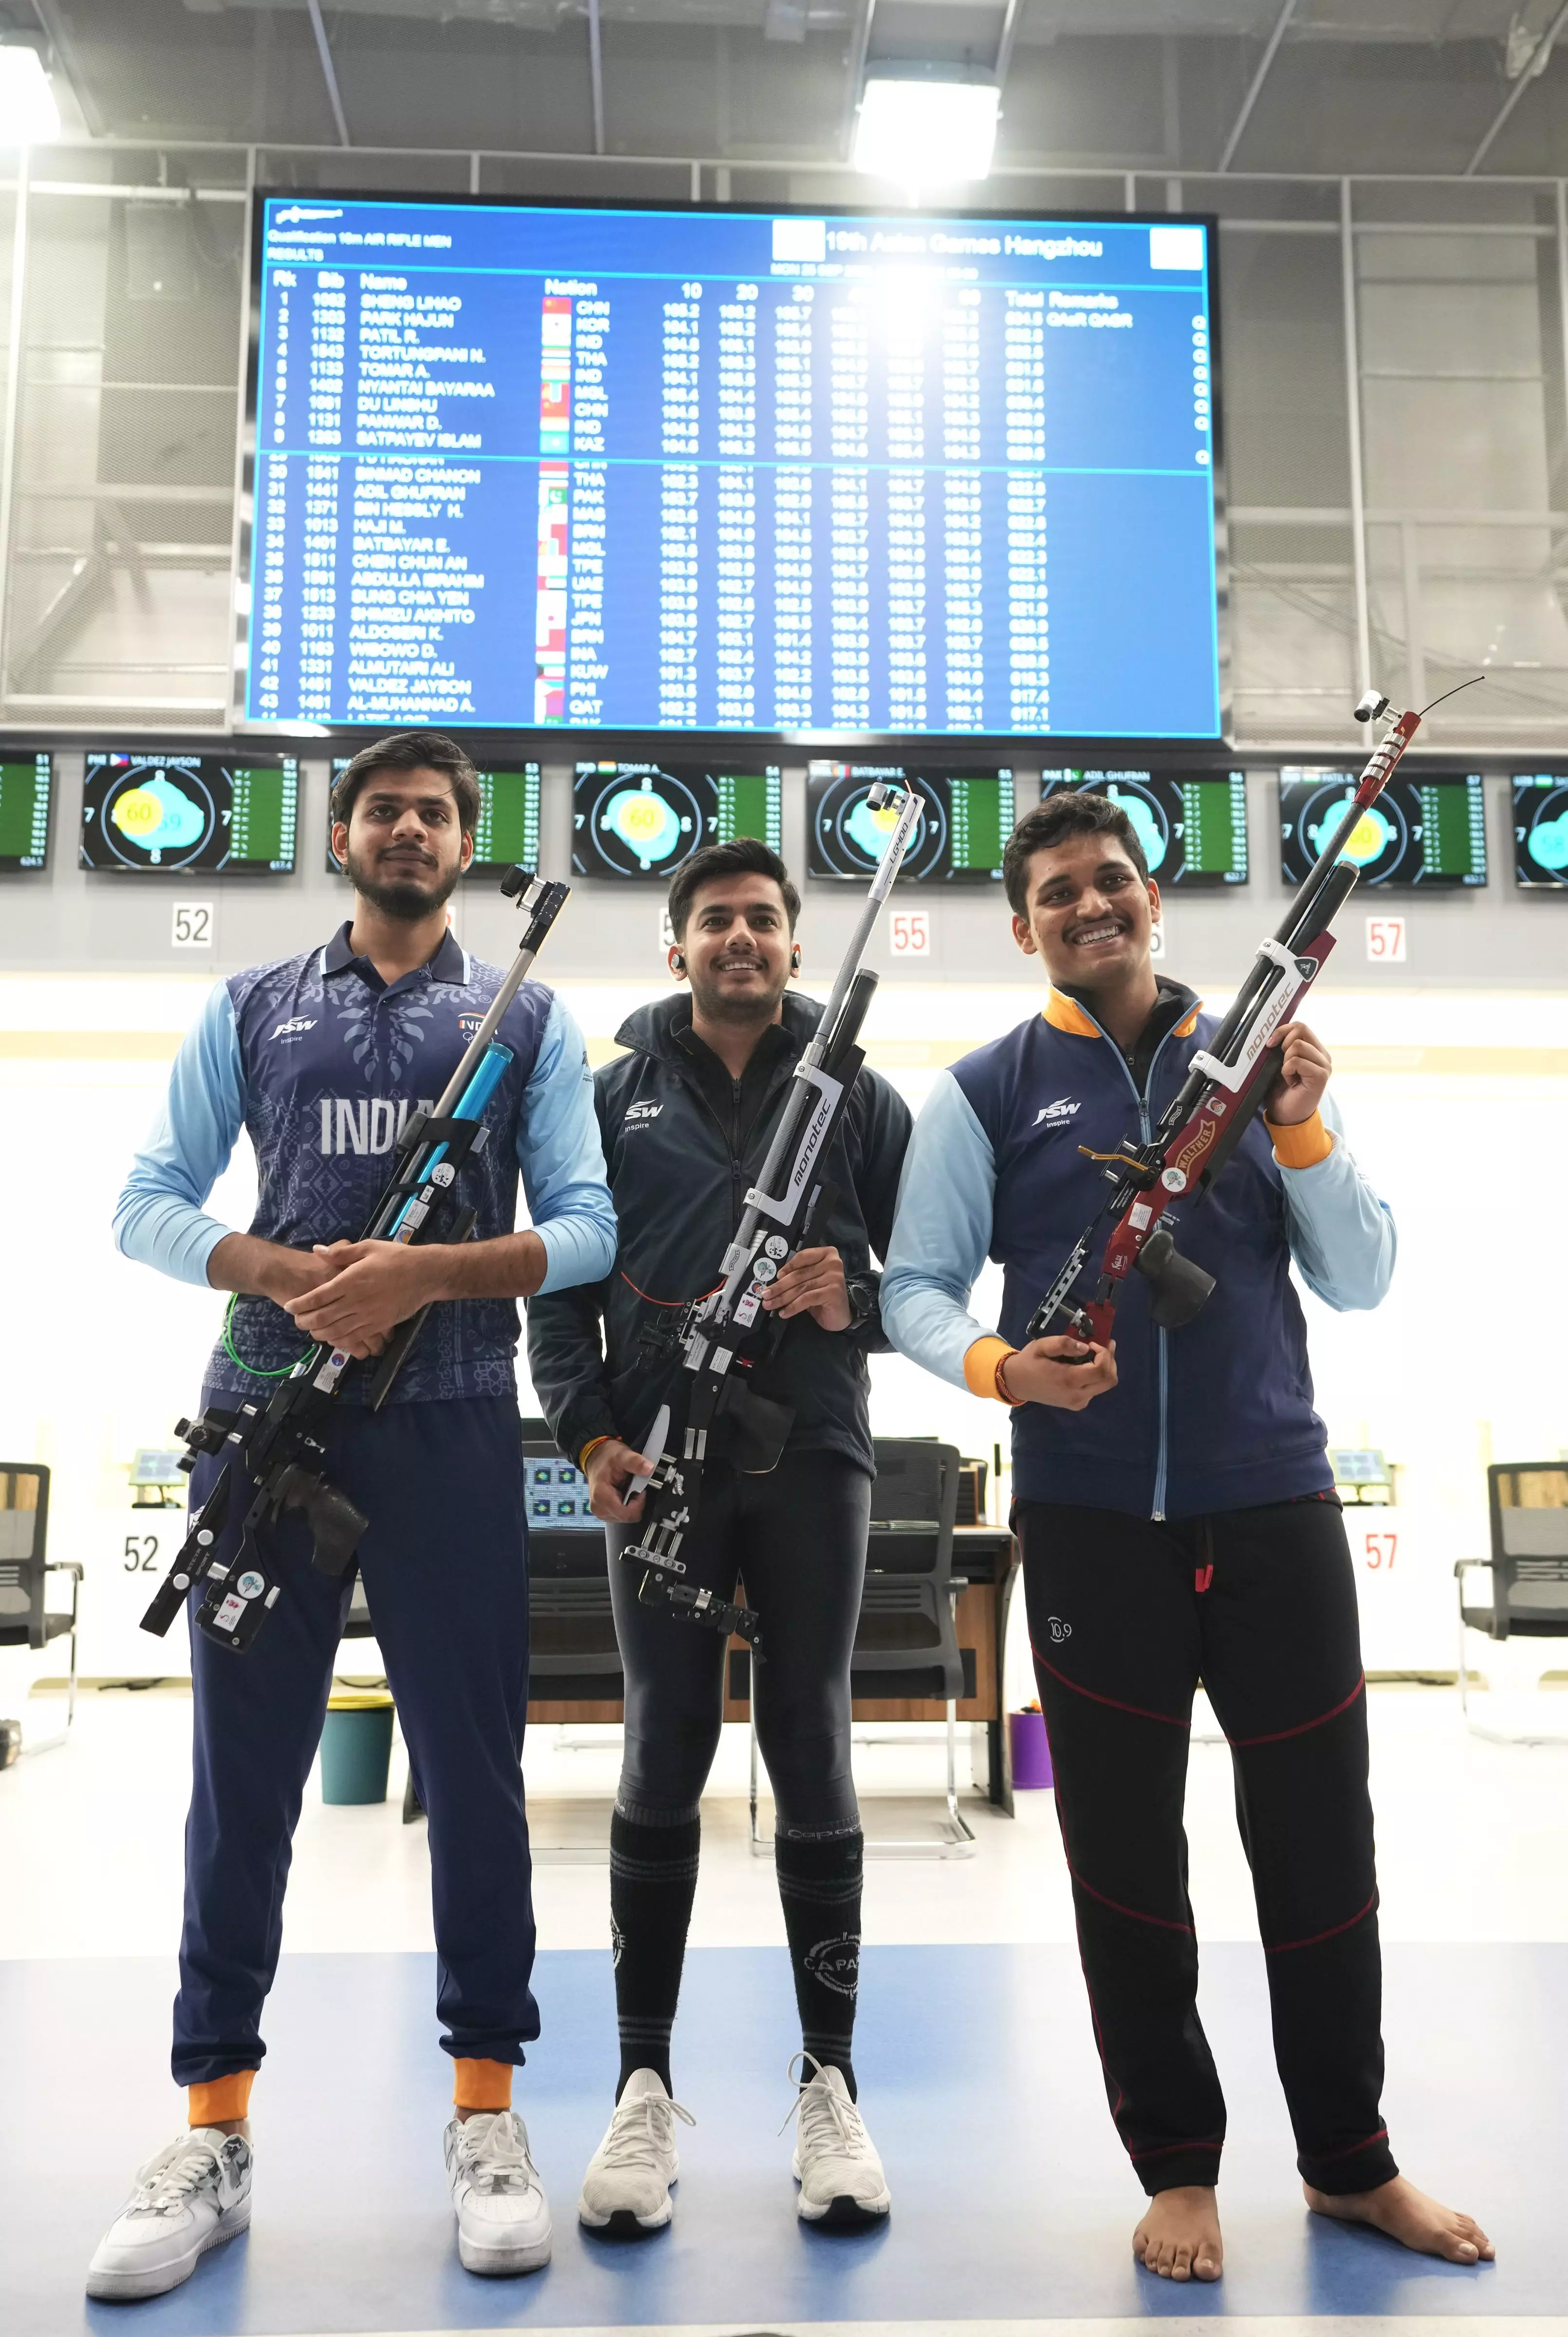 Asian Games: Indian 10m air rifle team wins gold with world record score